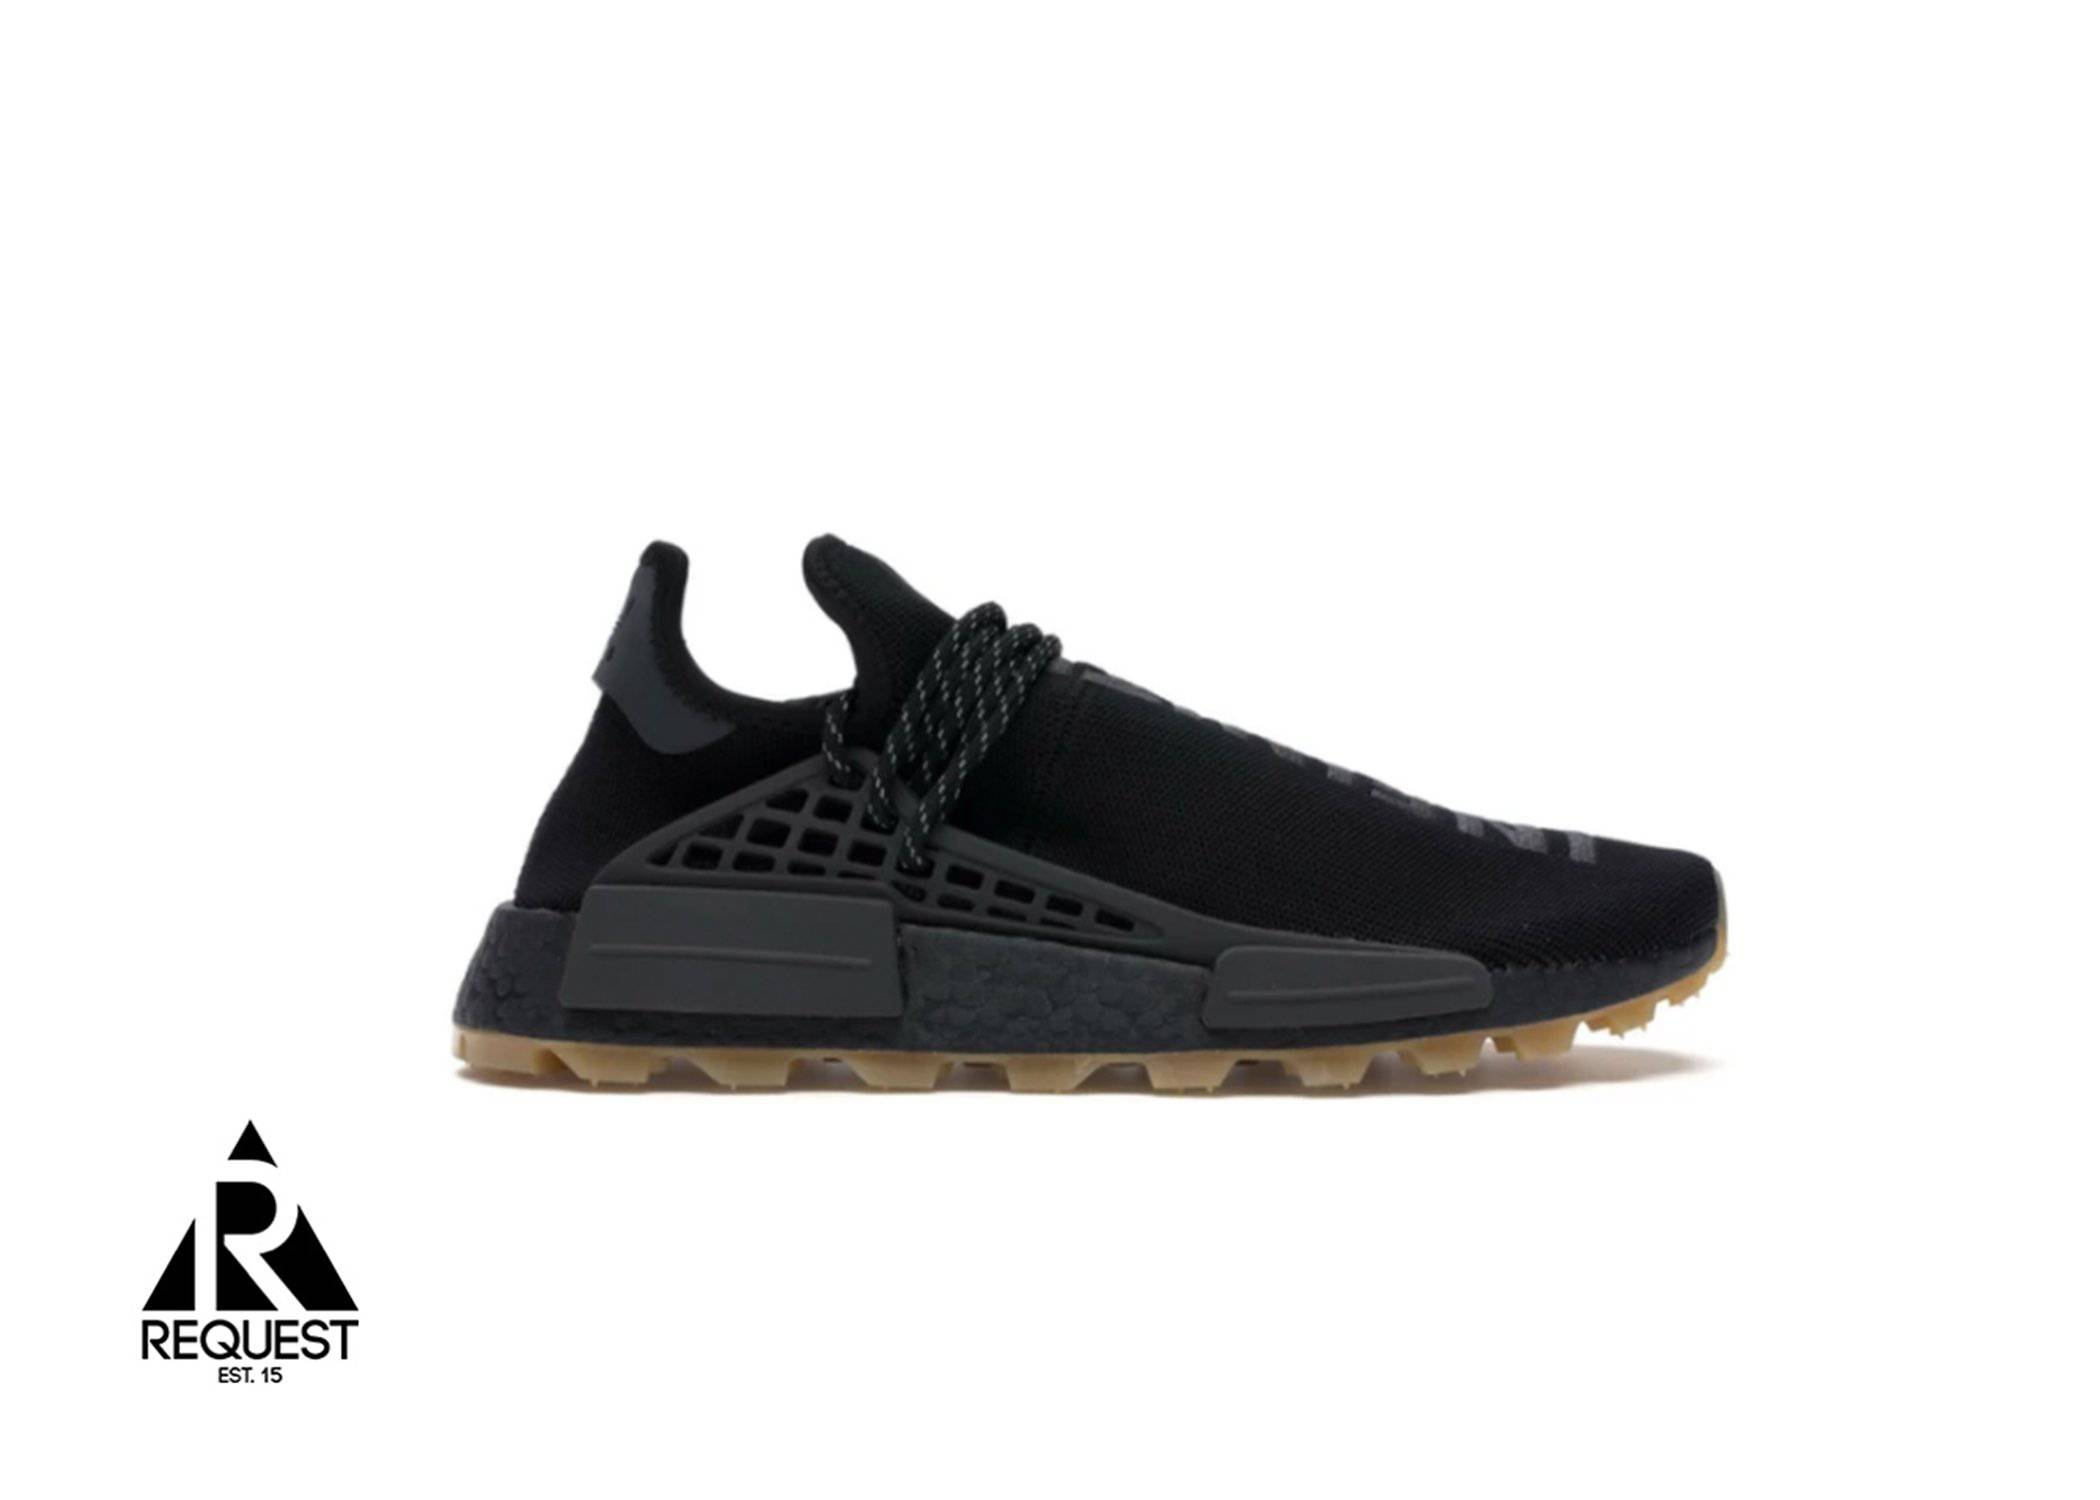 Adidas Human Race NMD “Now Is Her Time Black”